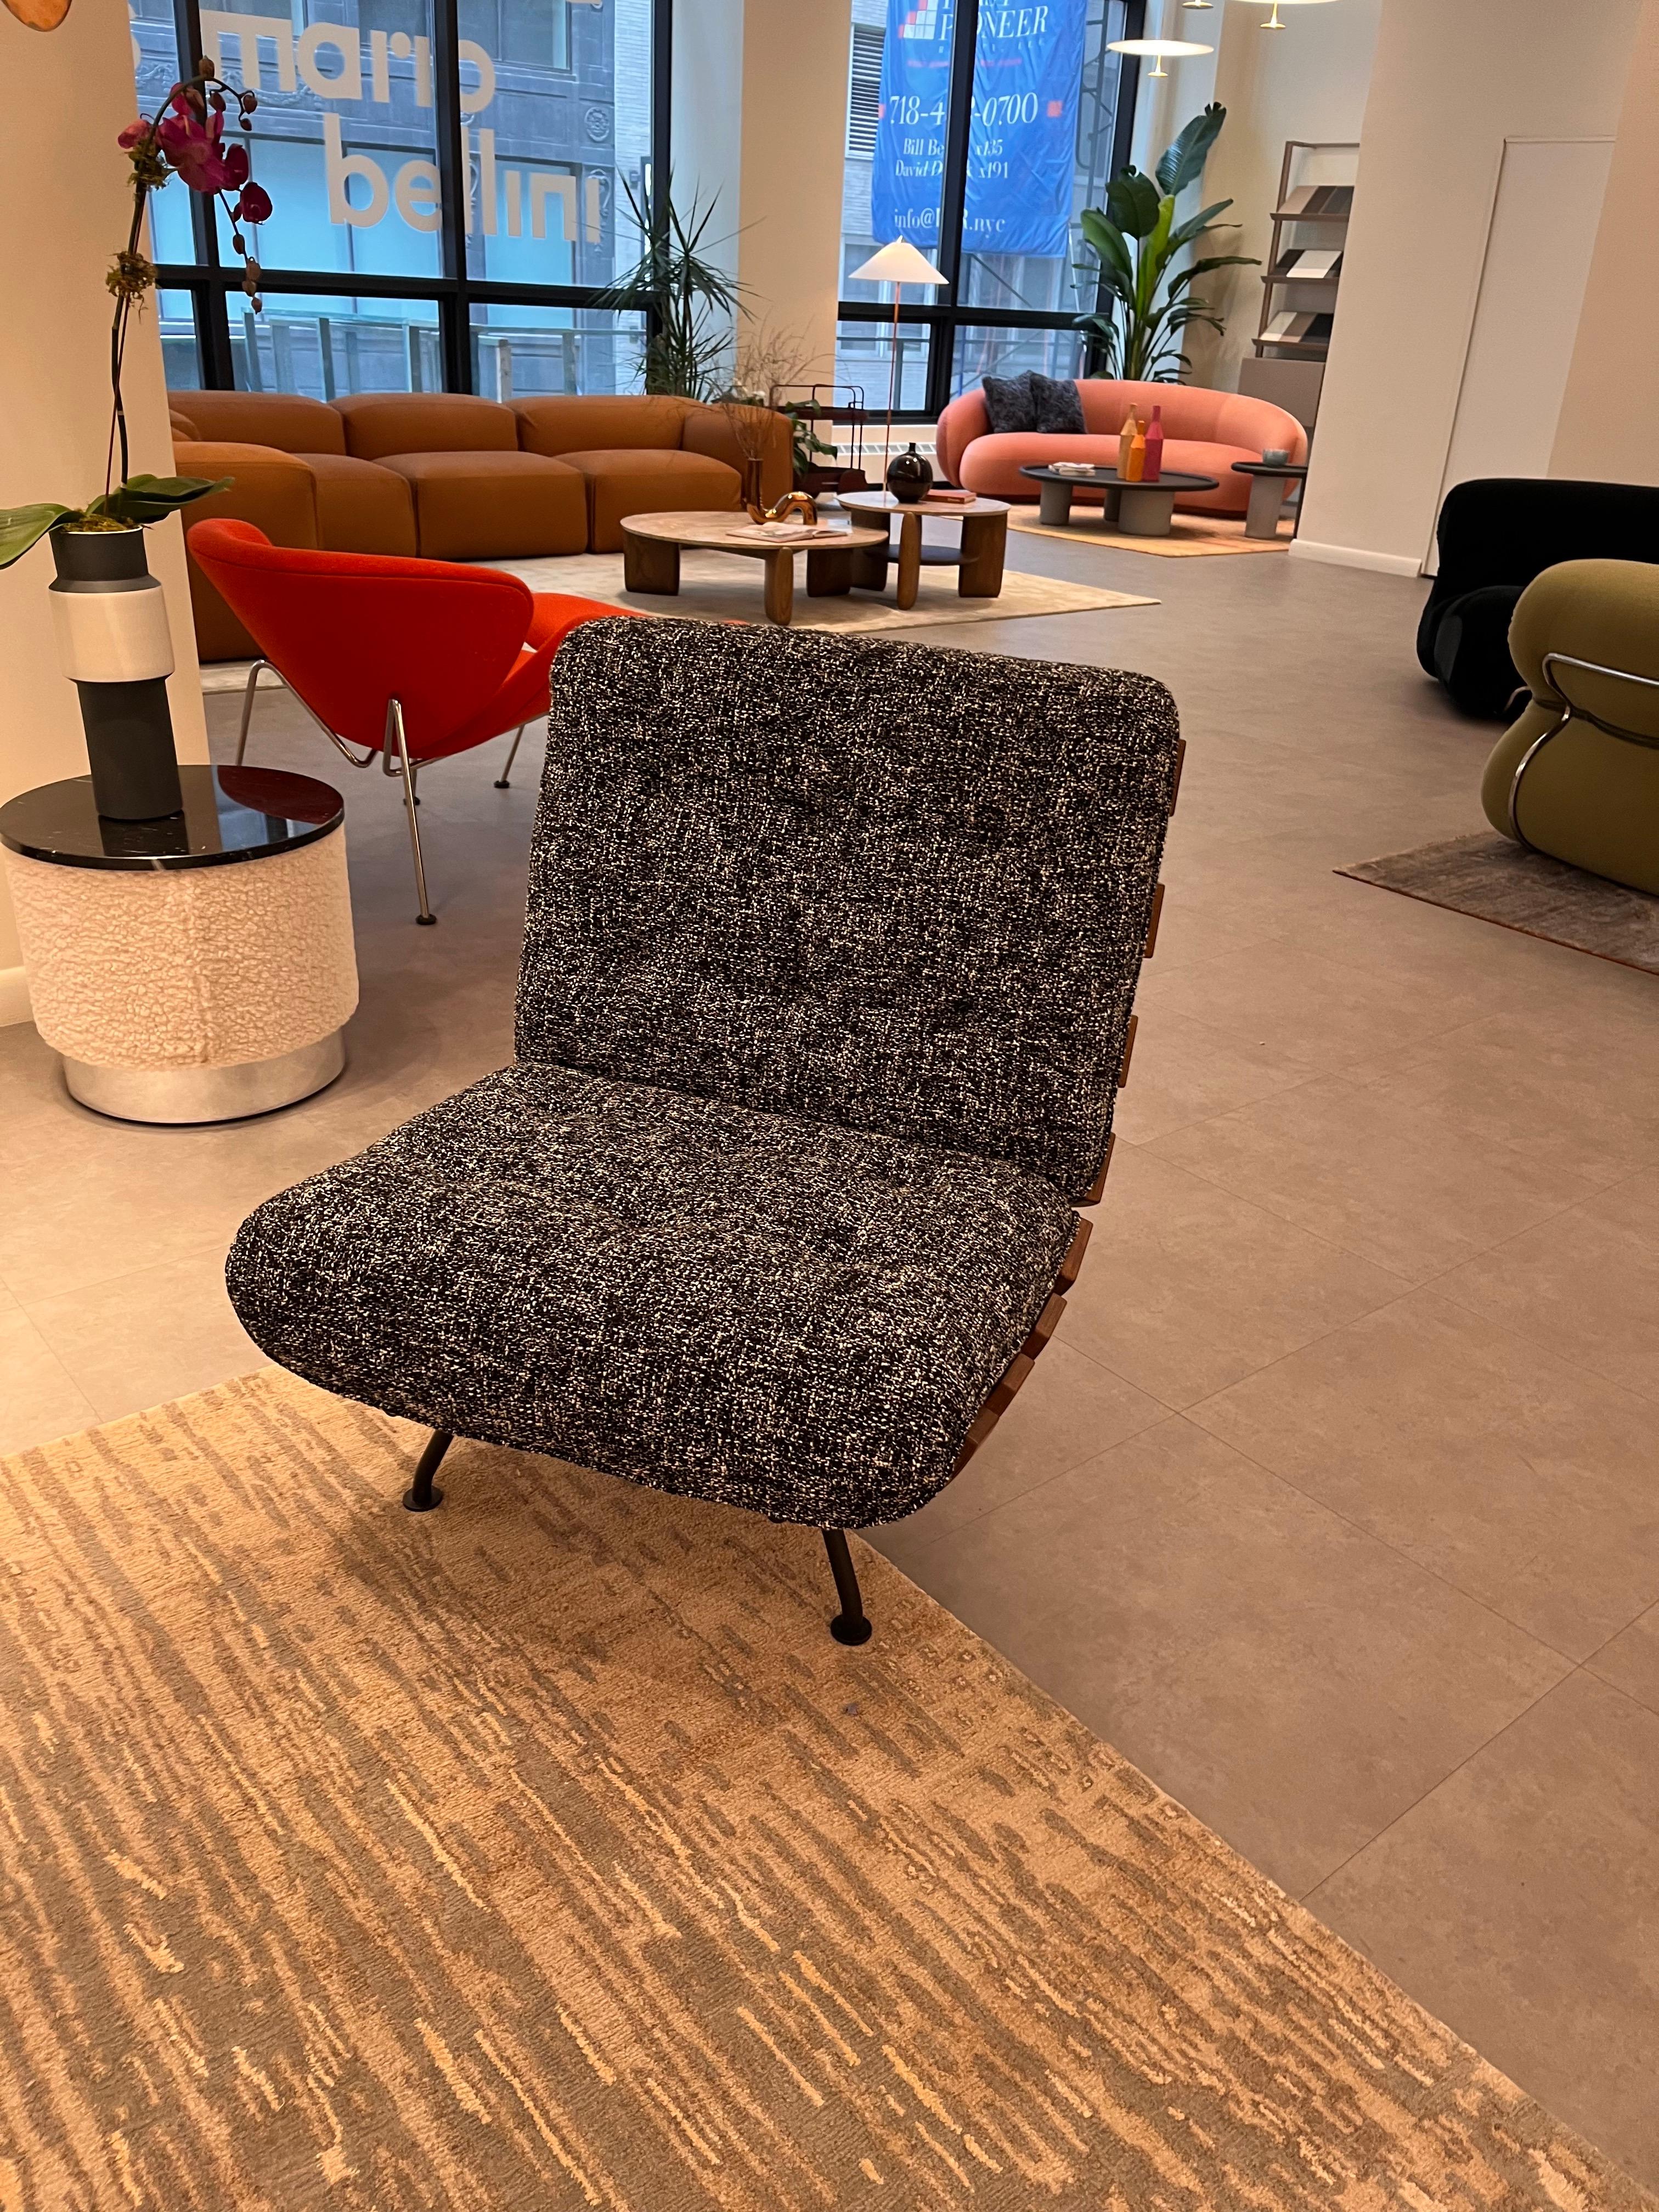 upholstered in Eremurus 05 - cat E
Frame: walnut
Tacchini is delighted to reissue Costela by Martin Eisler, icon of Brazilian 1950s design. An elegant yet informal armchair. With its sensual aesthetic, natural materials and intelligent design, it